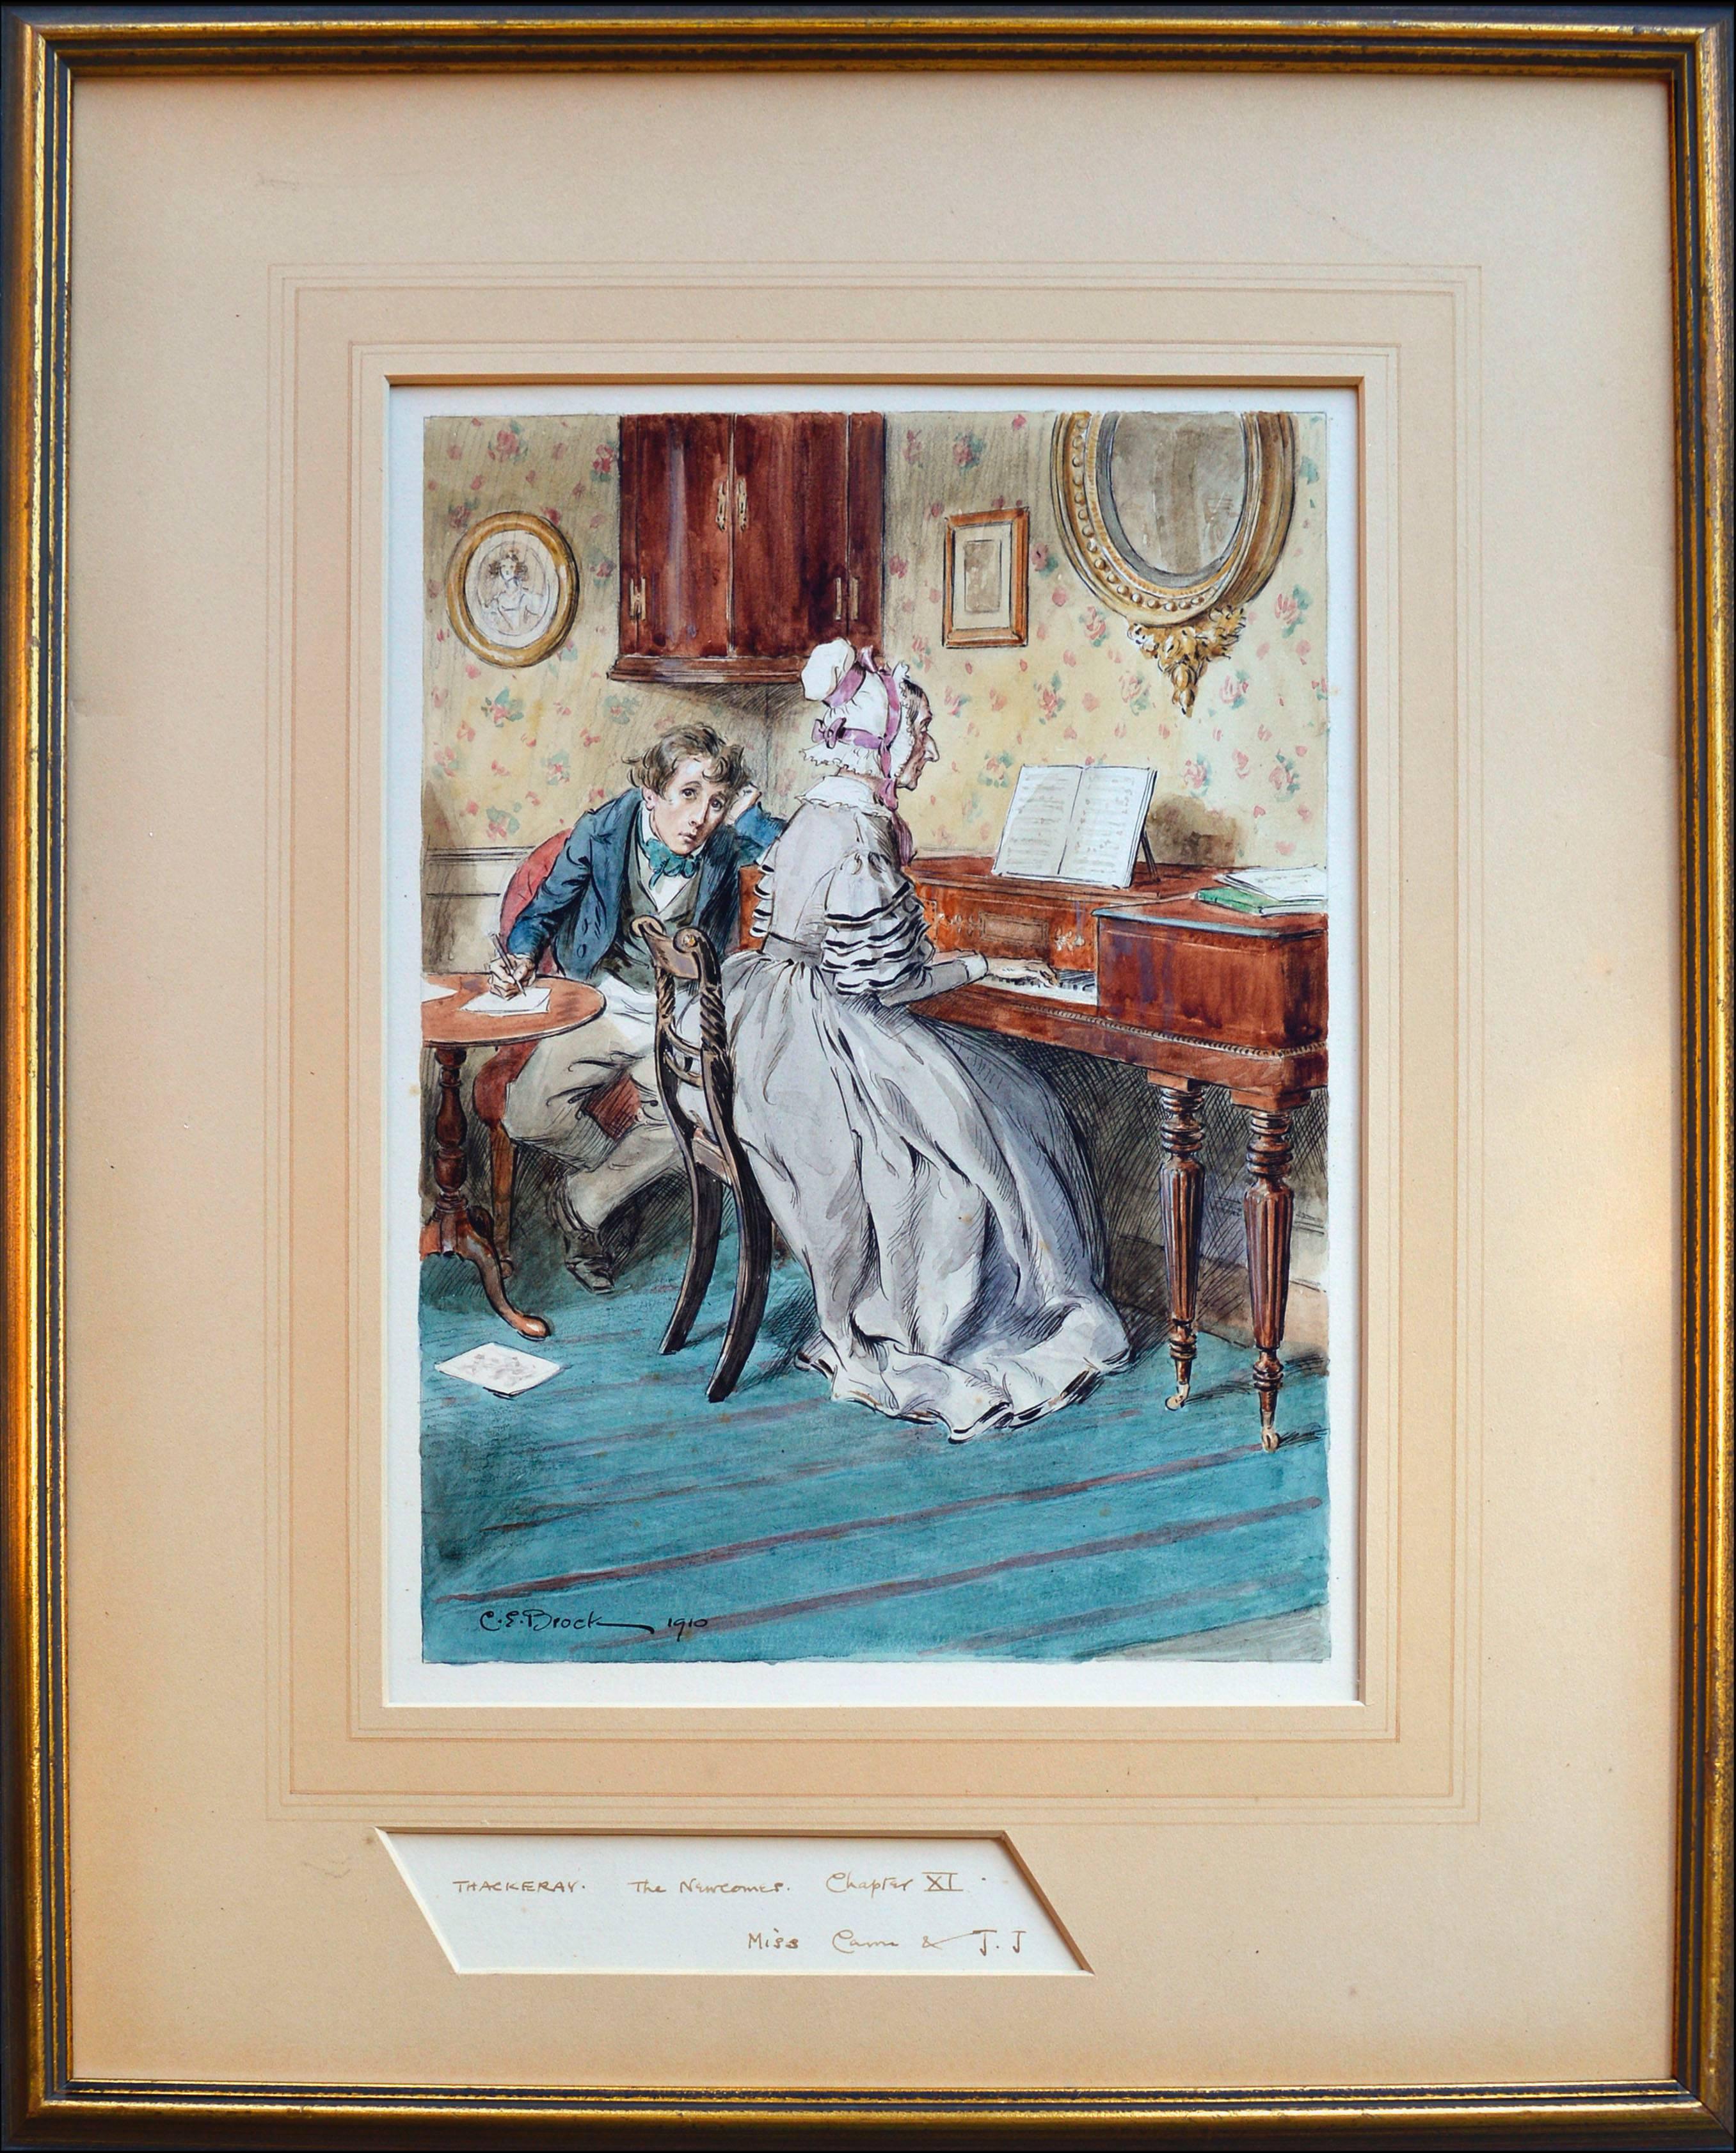 "The Newcomes, Chapter XI" - Early 20th Century Figurative Watercolor with Piano